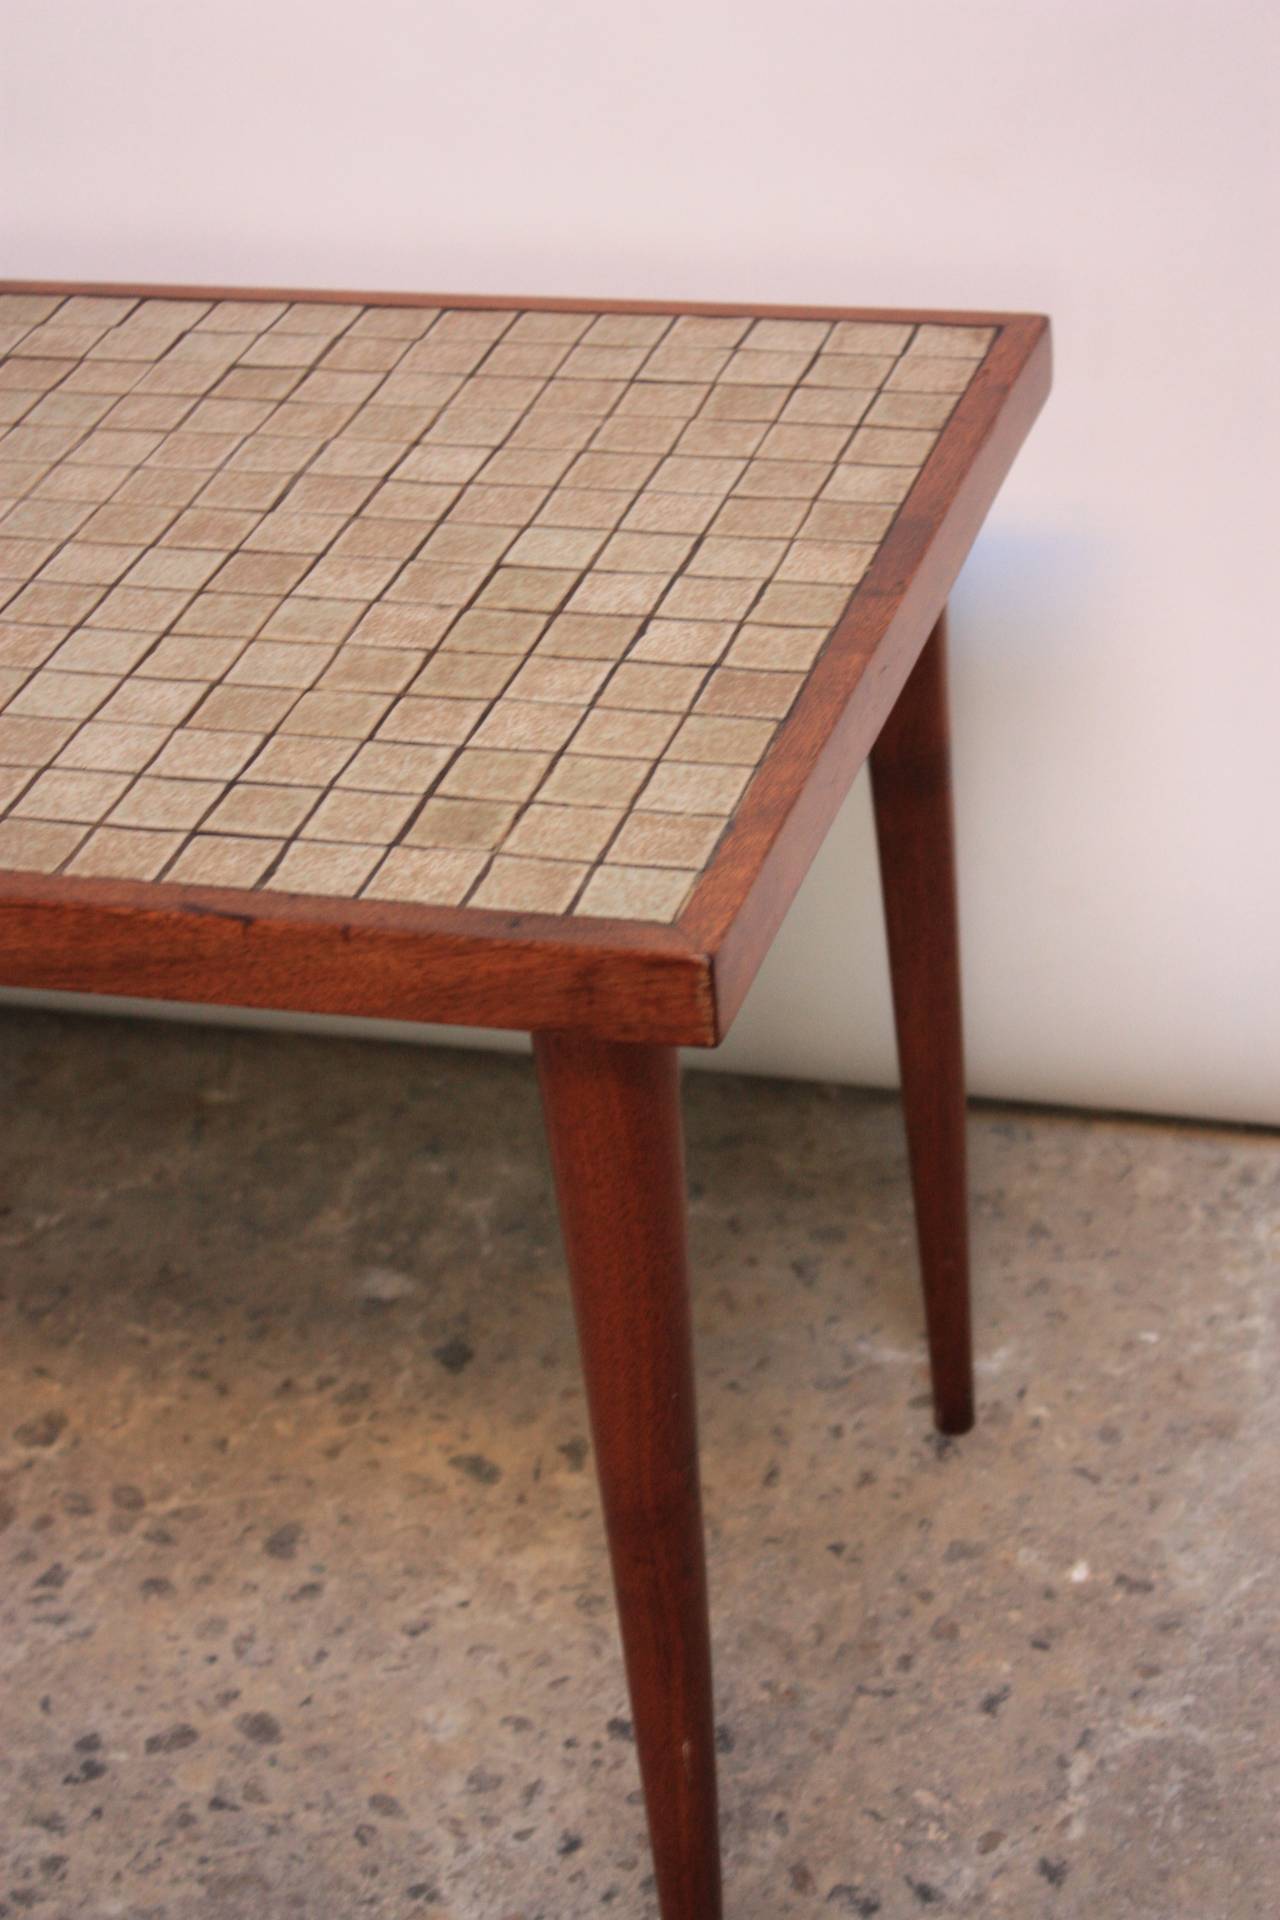 This tile-top table designed by Gordon Martz for Marshall Studios sits upon four removable walnut, tapered legs and is framed by a thin, walnut border. The piece is branded 'Marshal Studios' on the underside.